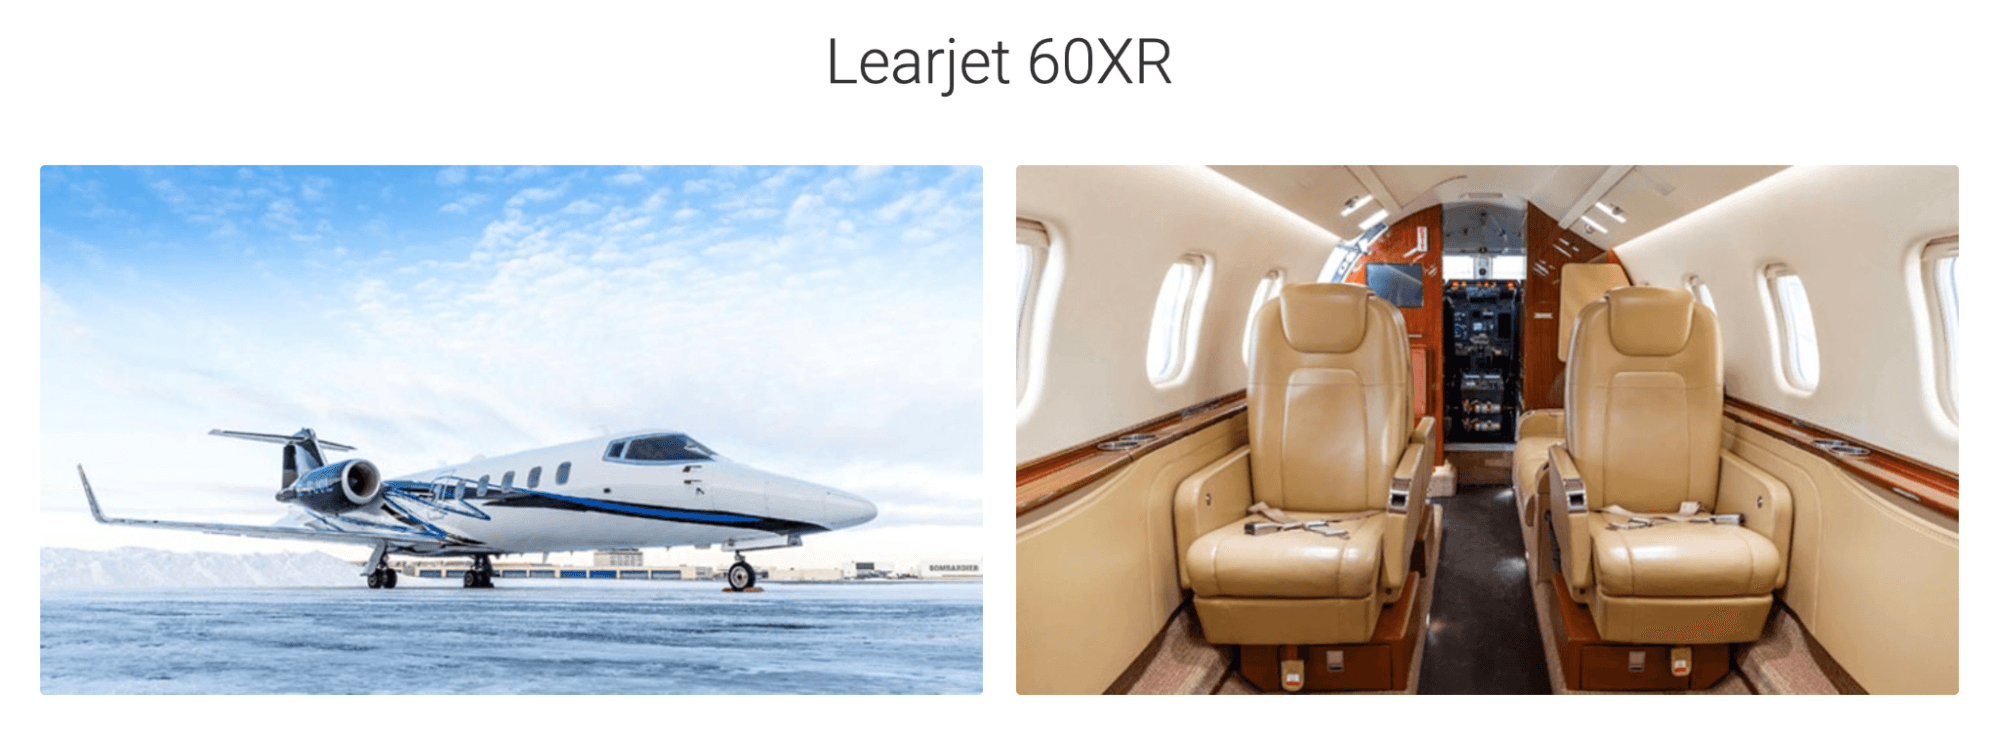 The picture shows the interior and exterior of Learjet 60XR jets available from JetOptions.